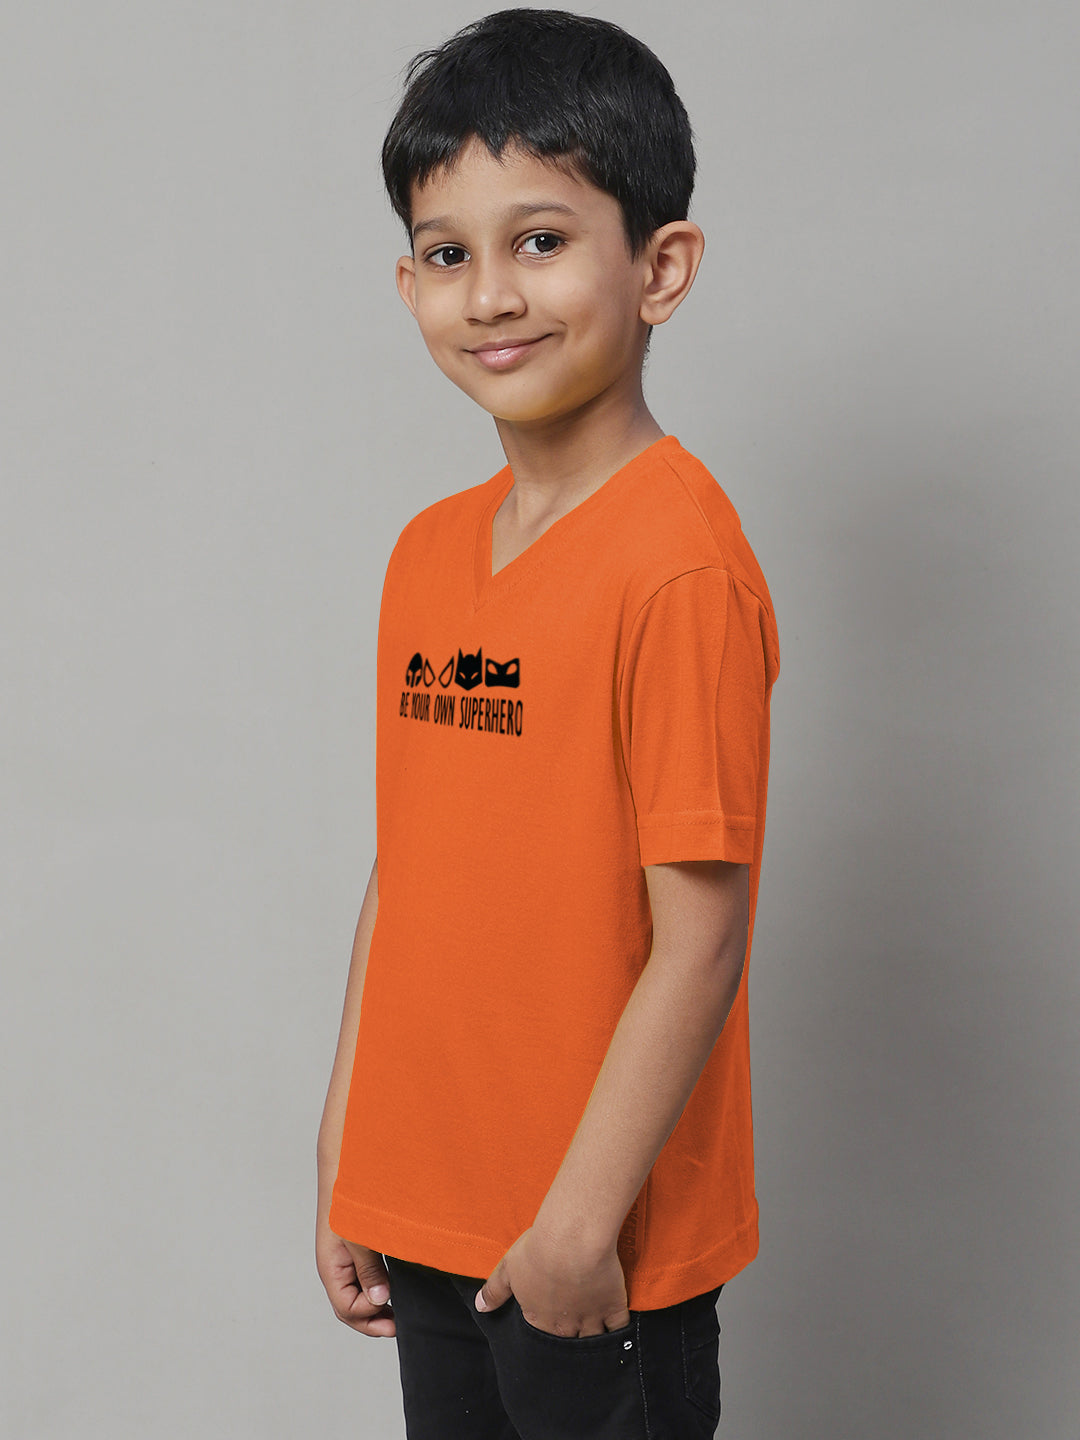 Boys Be Your Own Superhero Half Sleeves Printed T-Shirt - Friskers